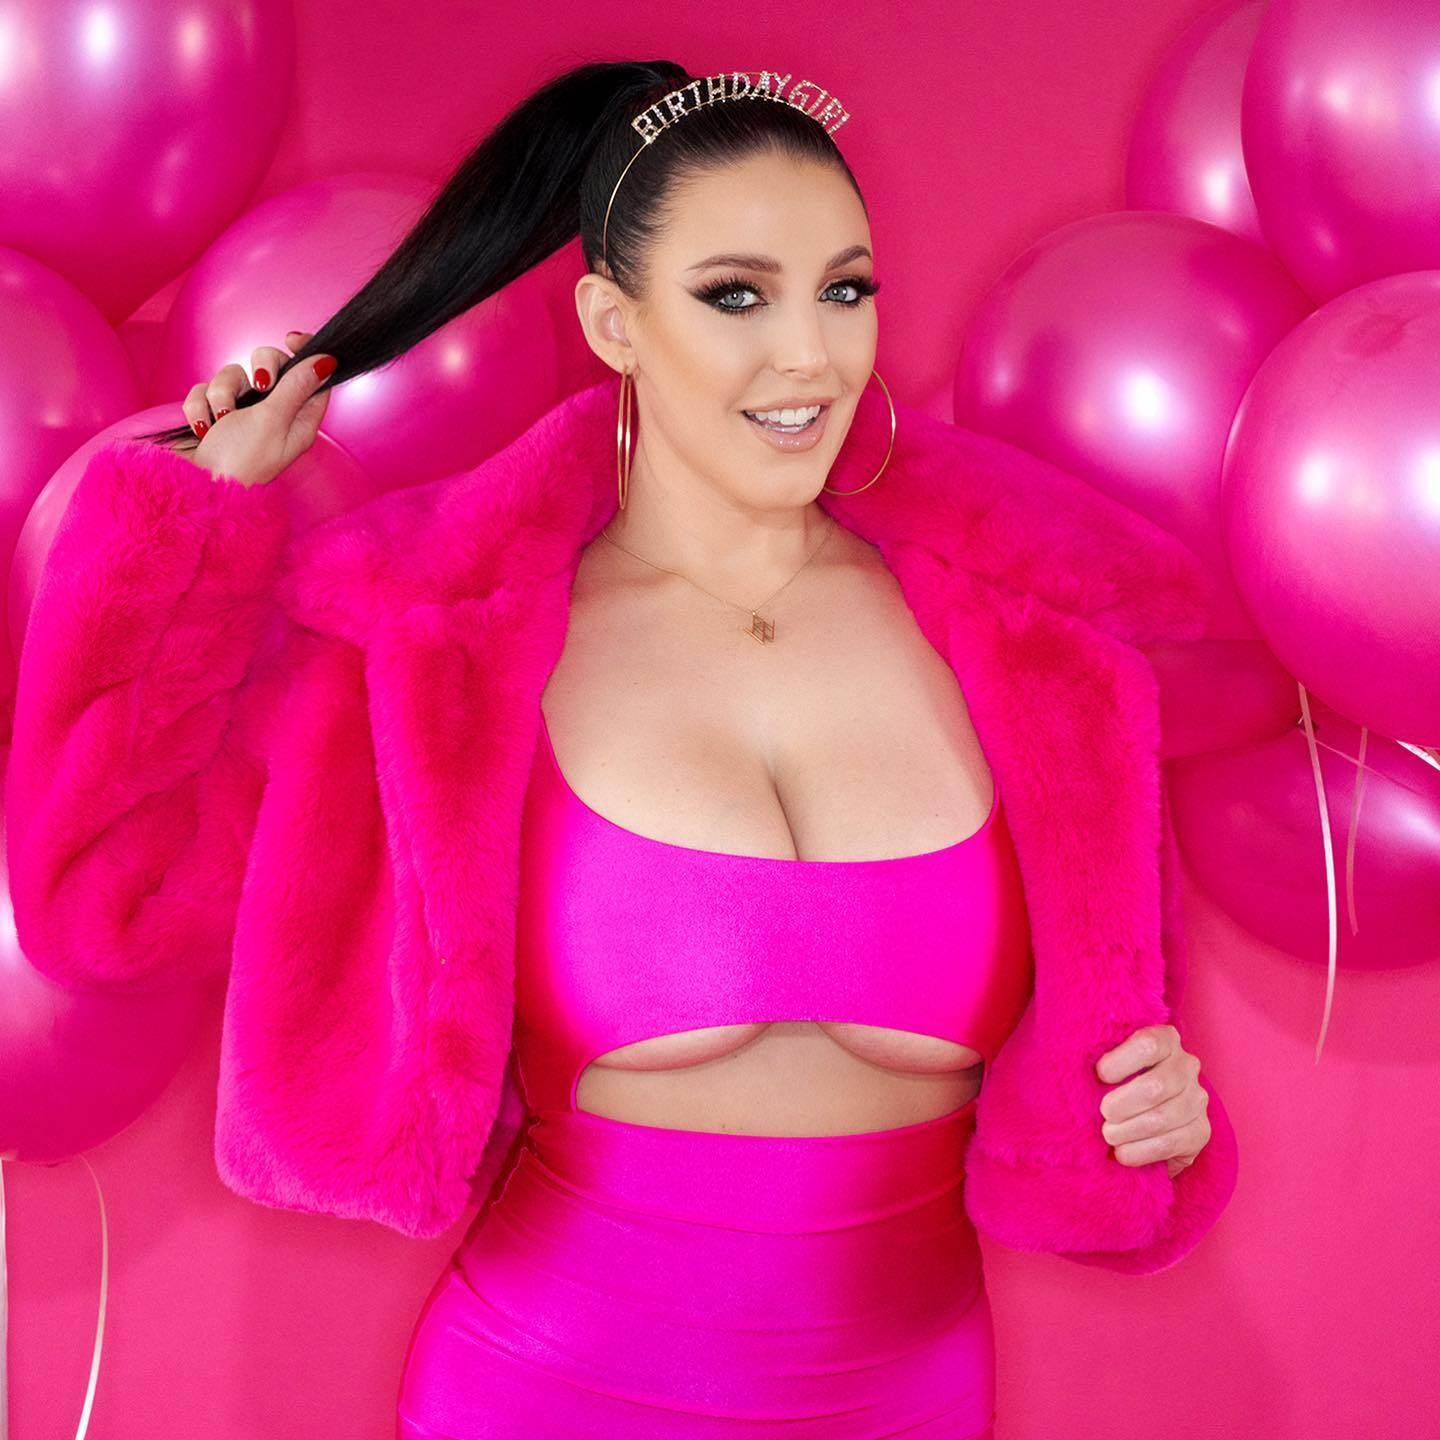 Angela White Biography, Age, Height, Personal Life, Wiki & Facts